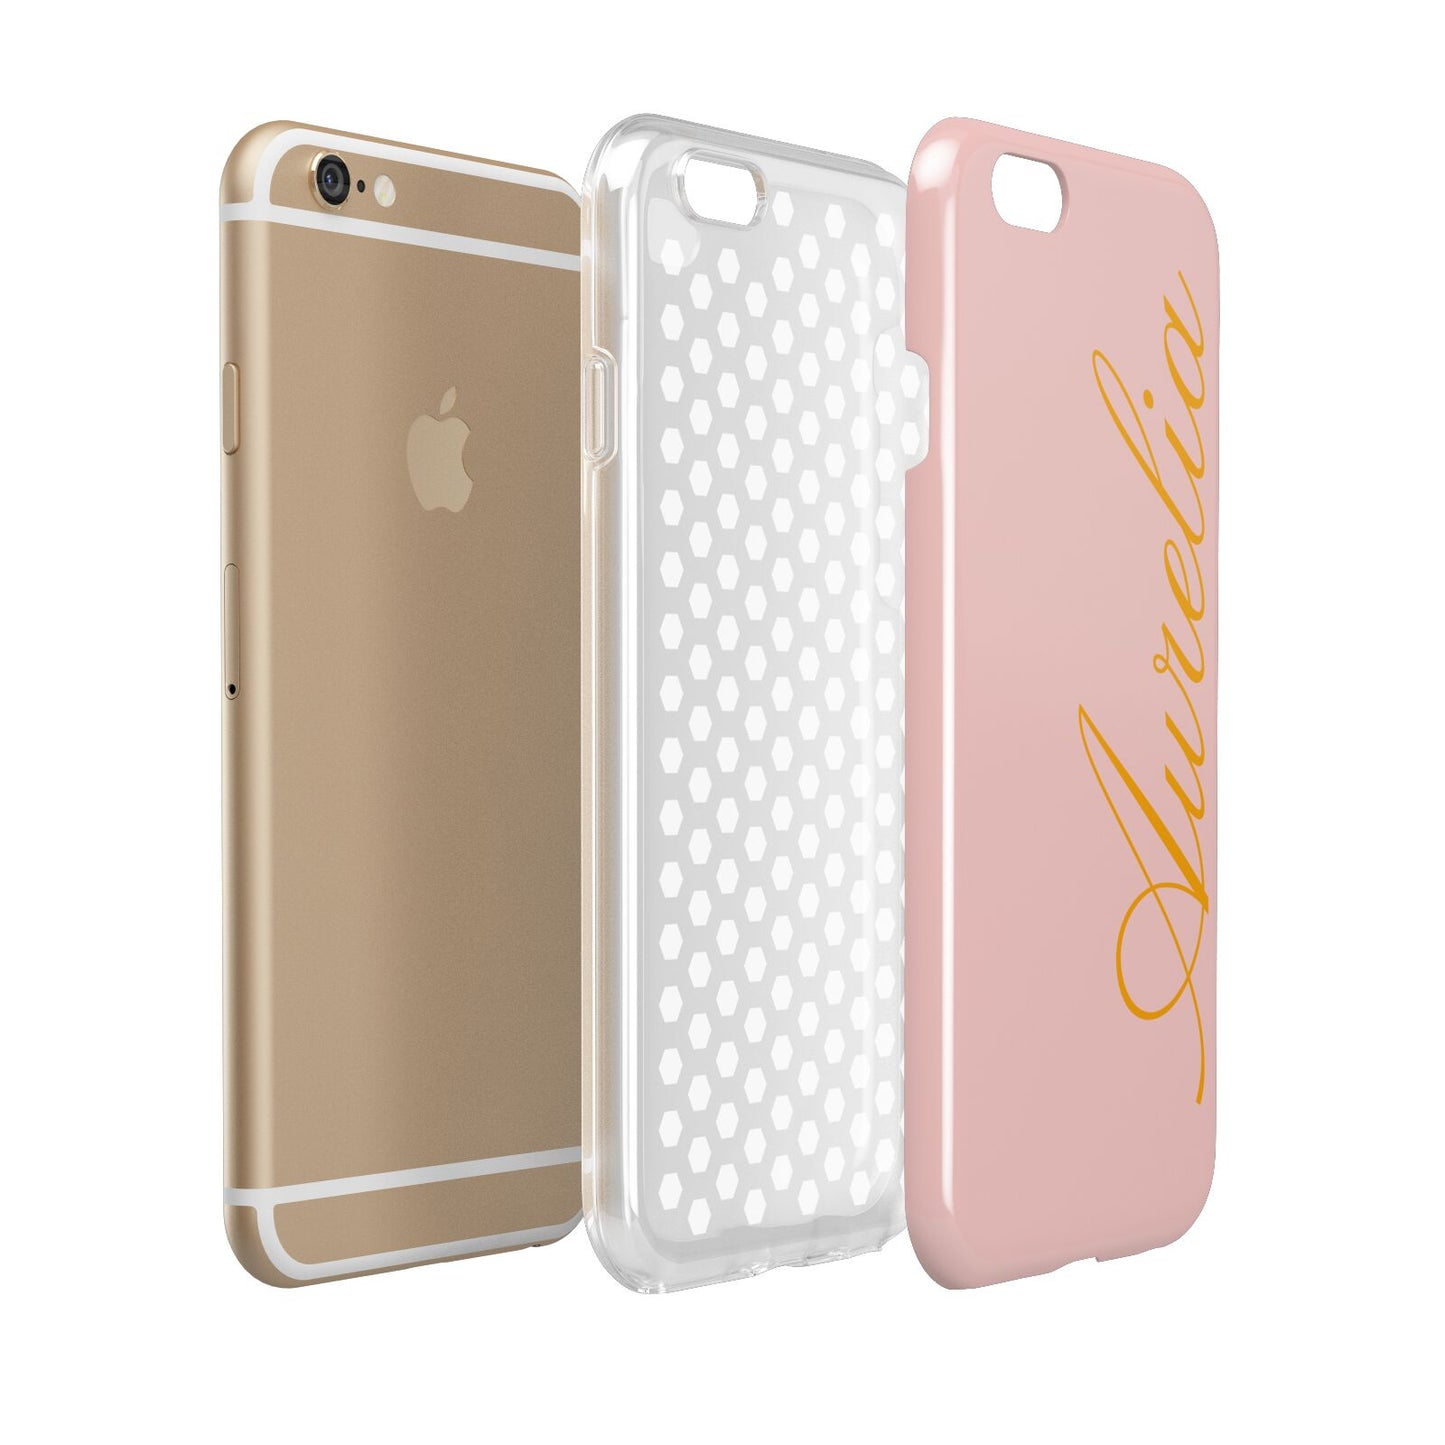 Custom Apple iPhone 6 3D Tough Case Expanded view